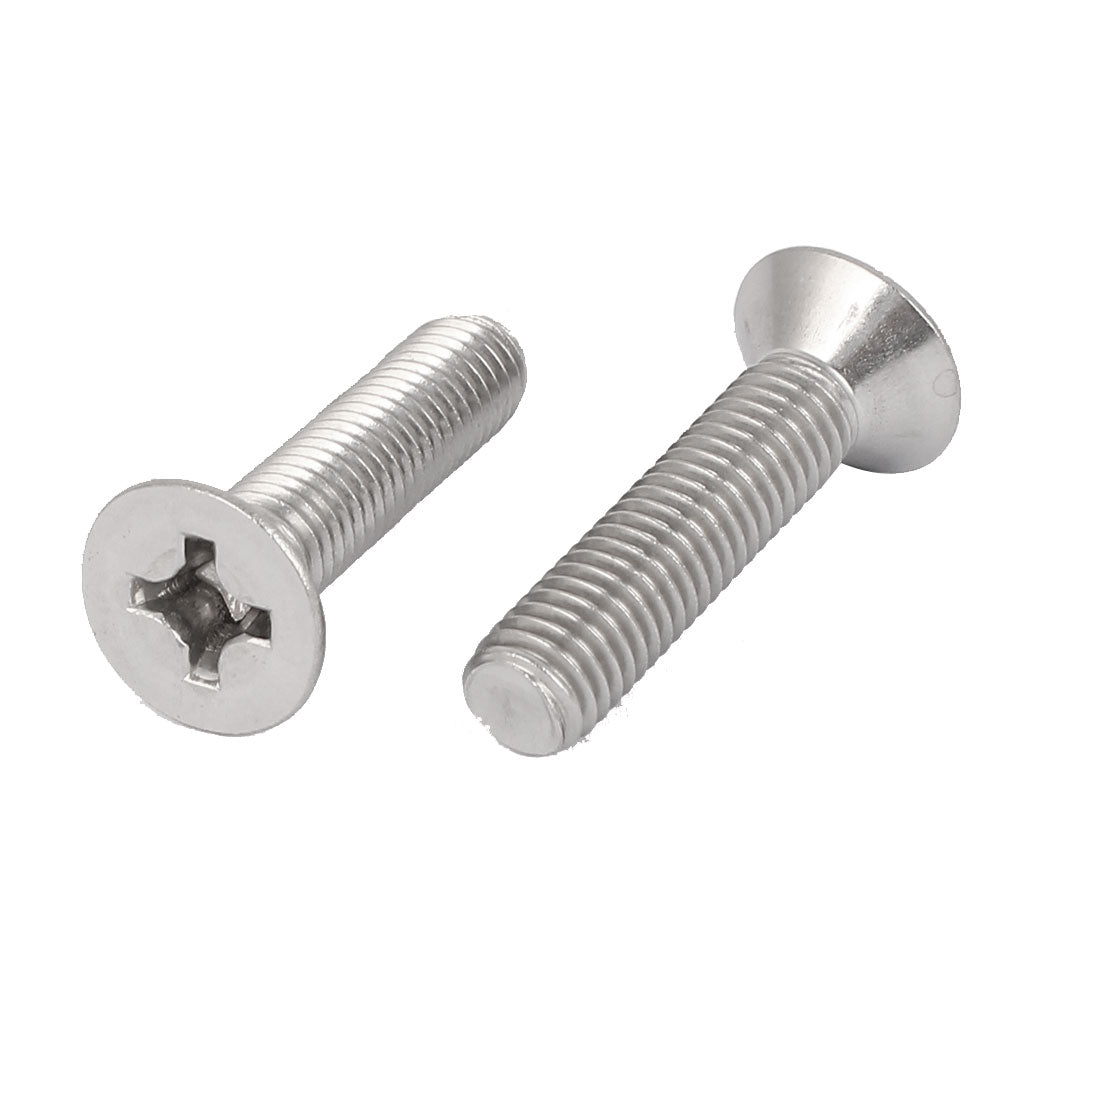 uxcell Uxcell 5 Pcs M8x35mm 316 Stainless Steel Flat Head Phillips Machine Screws Fasteners